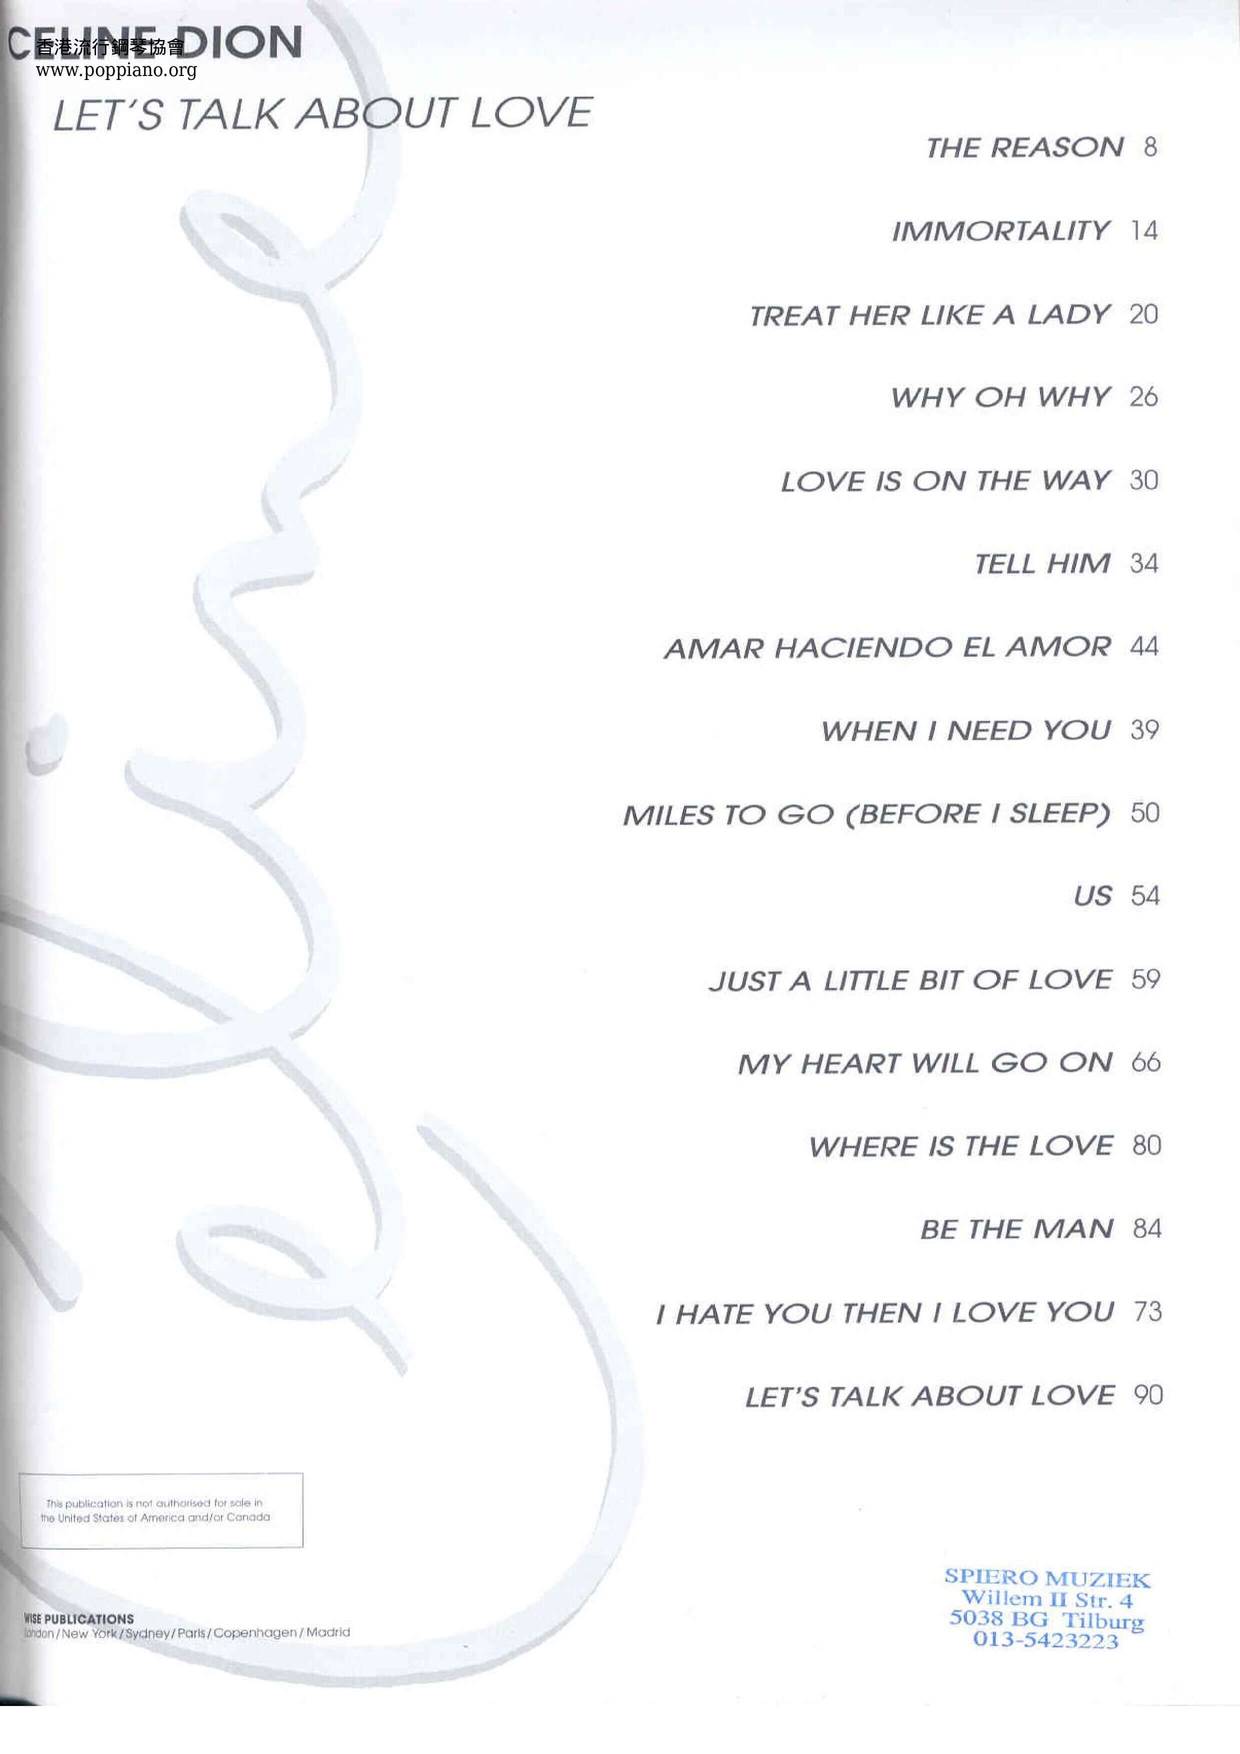 Celine Dion Songbook 90 Pages Score